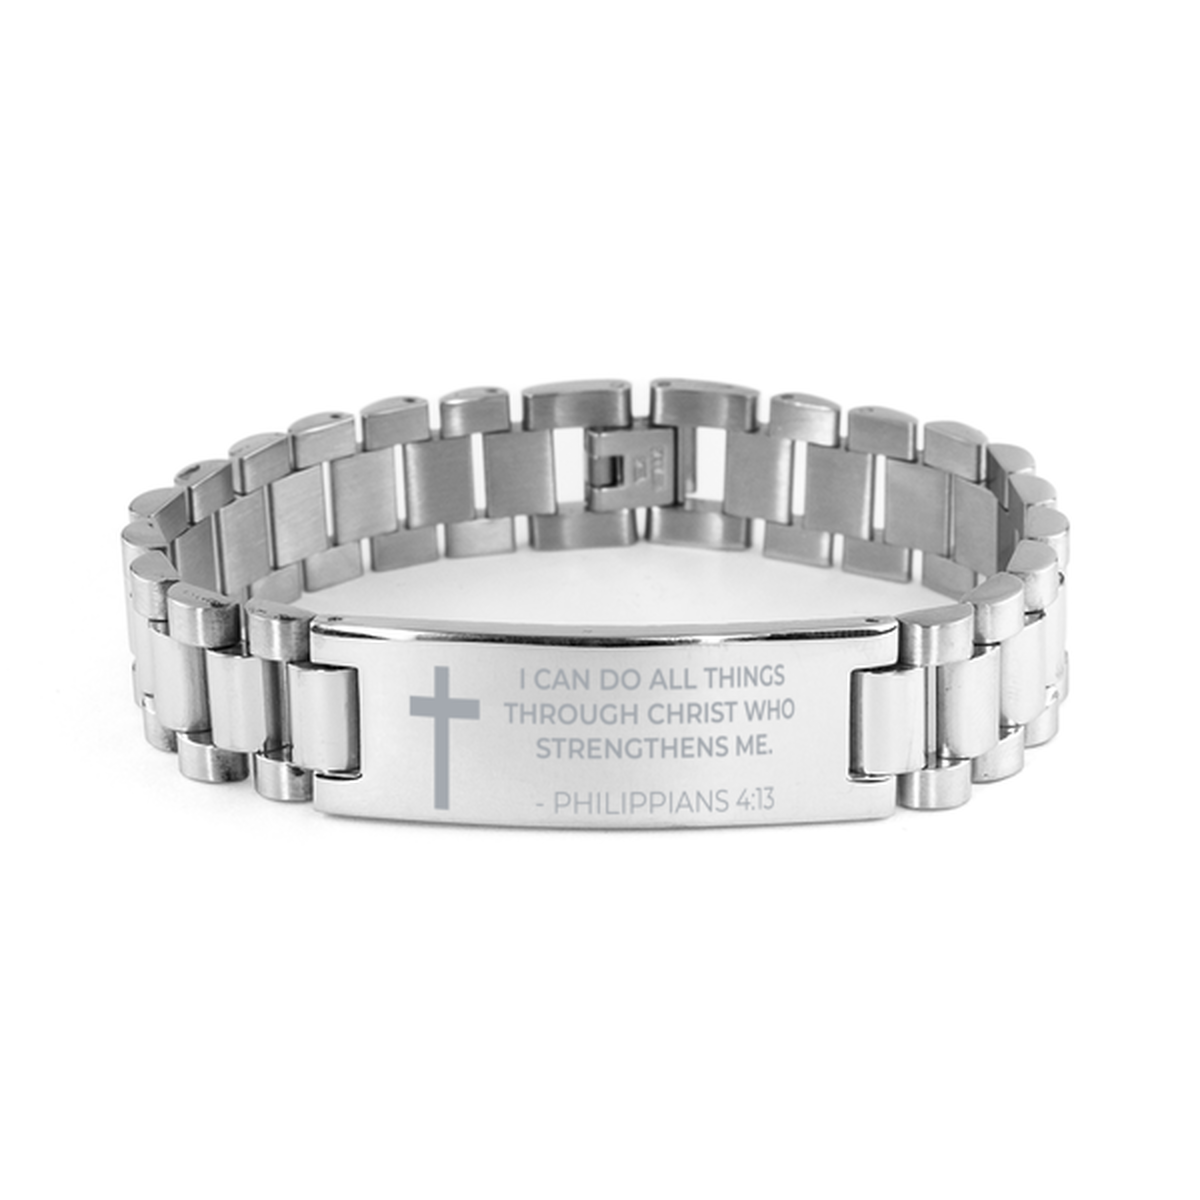 Christian Ladder Stainless Steel Bracelet, Philippians 4:13 I Can Do All Things Through Christ Who, Motivational Bible Verse Gifts For Men Women